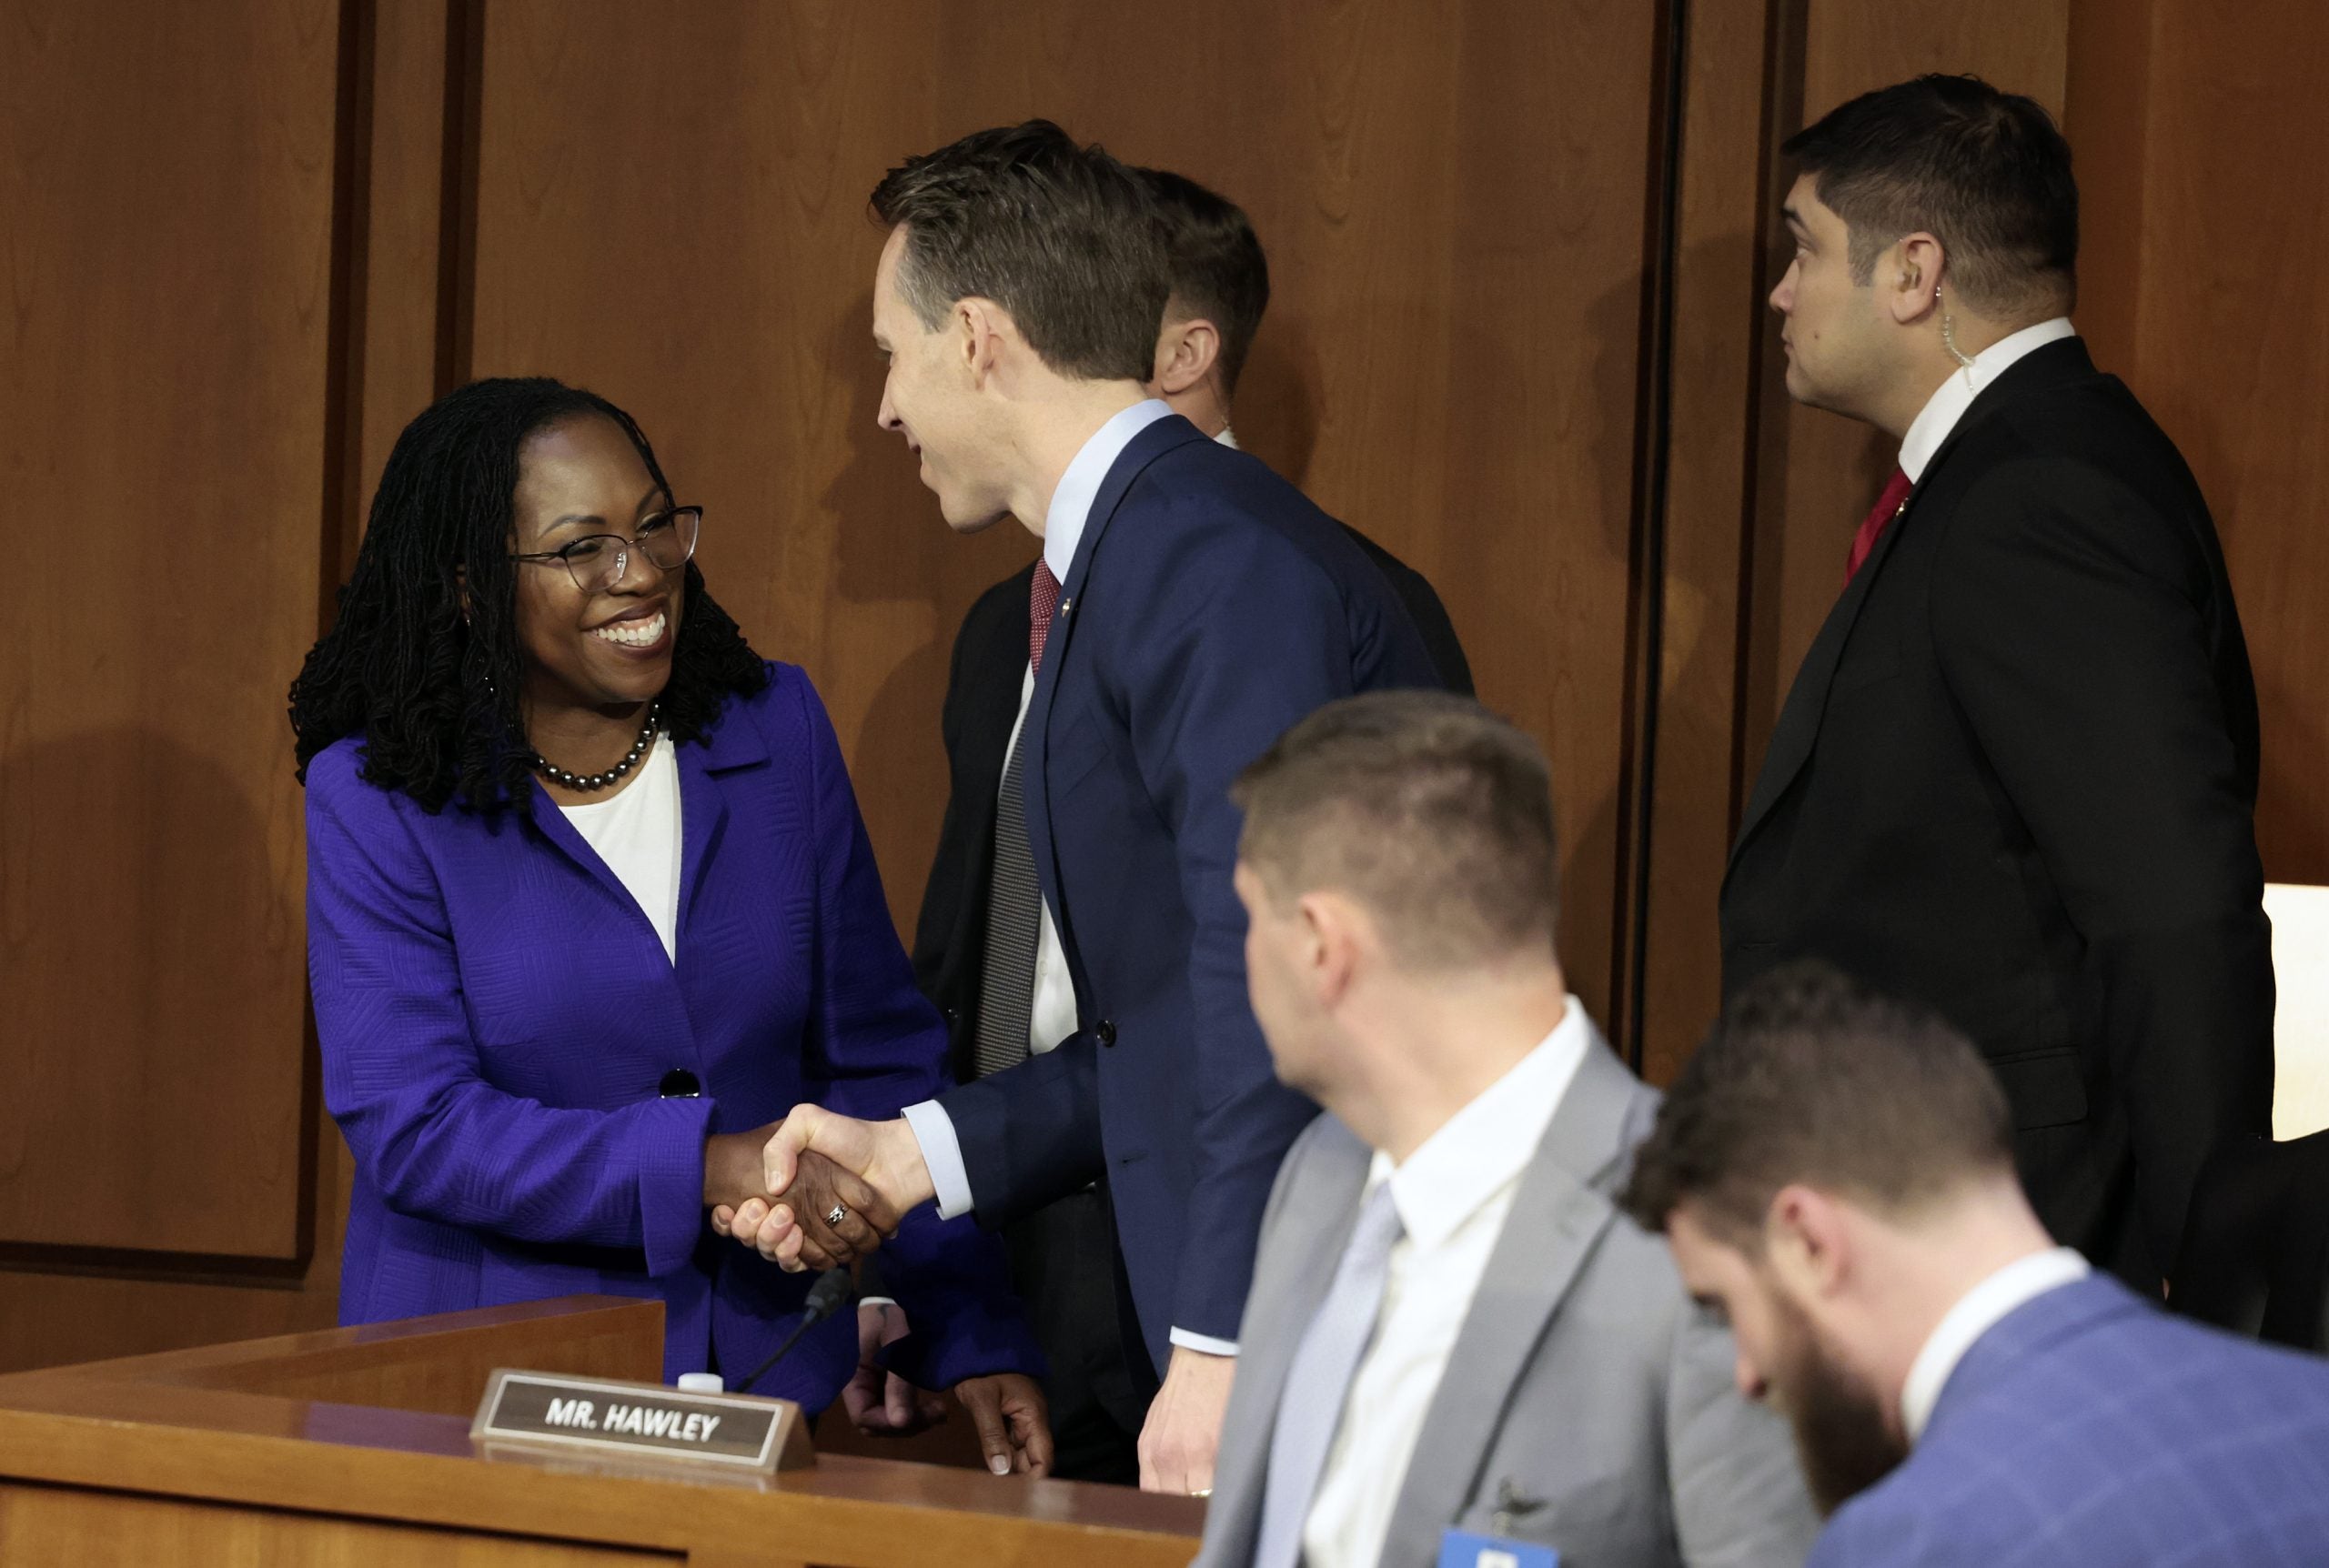 Here Are 5 Things To Know After The First Day Of Ketanji Brown Jackson’s Confirmation Hearing